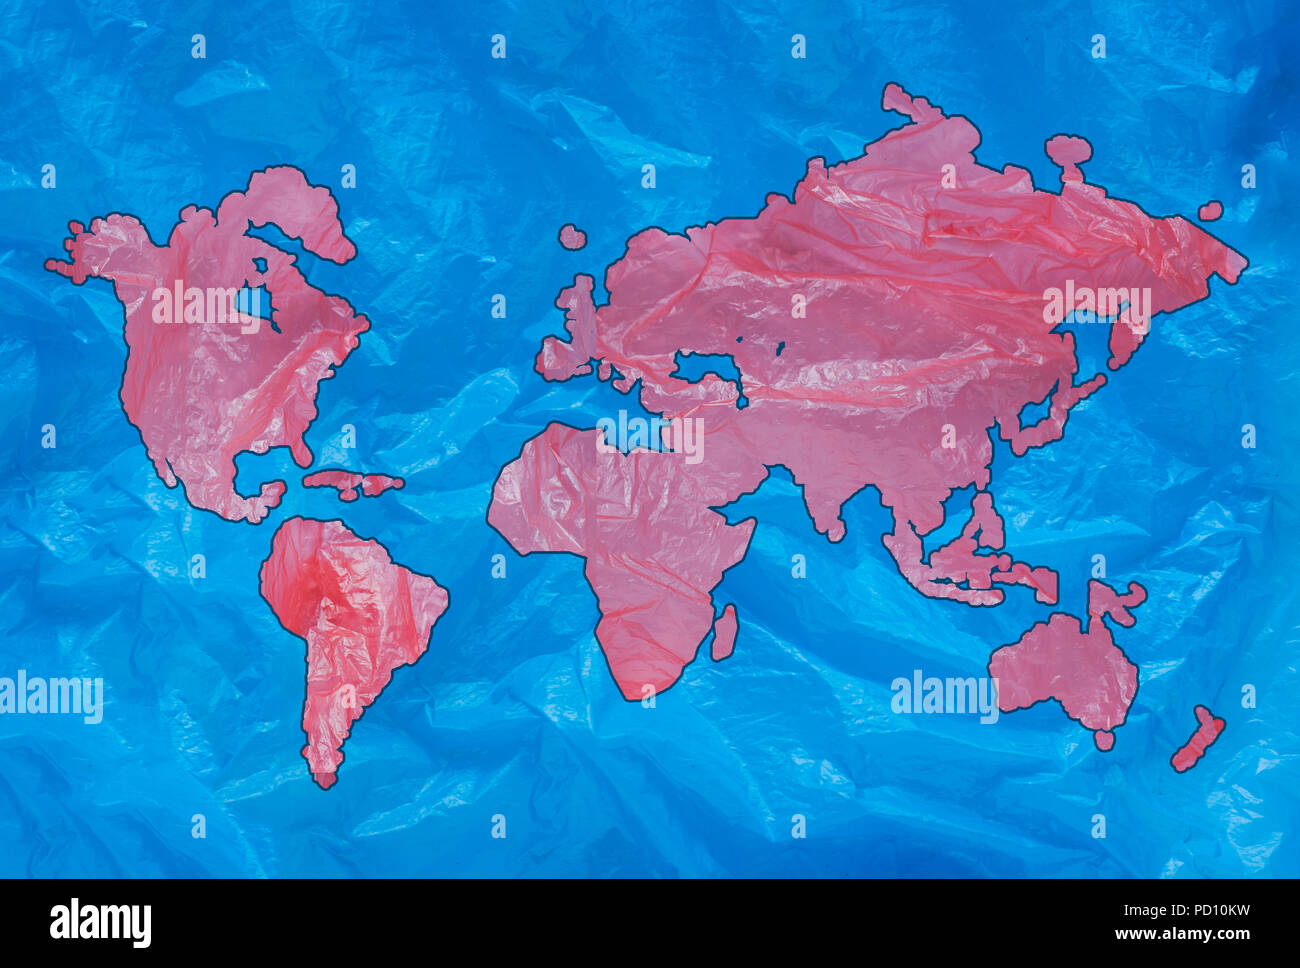 a map of the earth made with a plastic bag, a concept of global plastic pollution Stock Photo